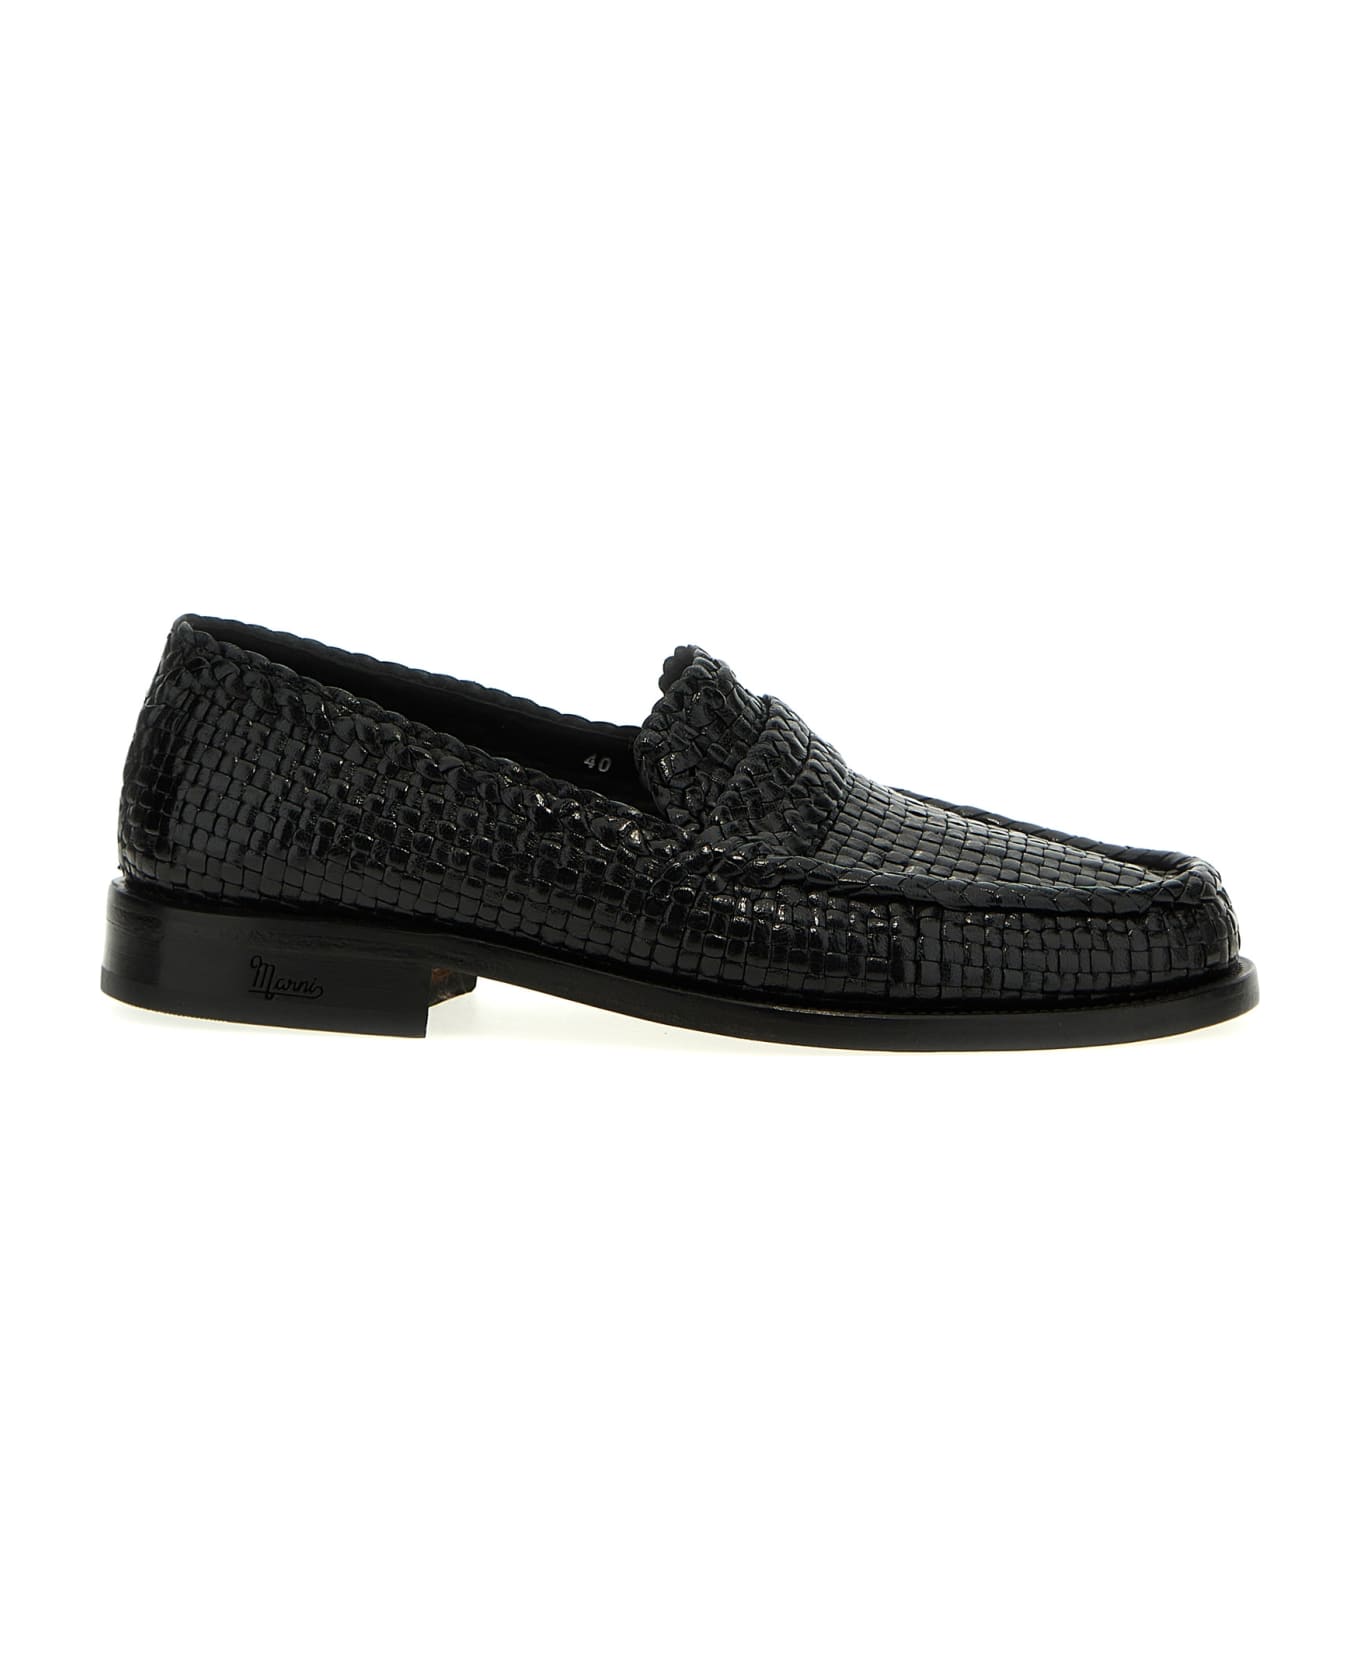 Marni Braided Leather Loafers - BLACK